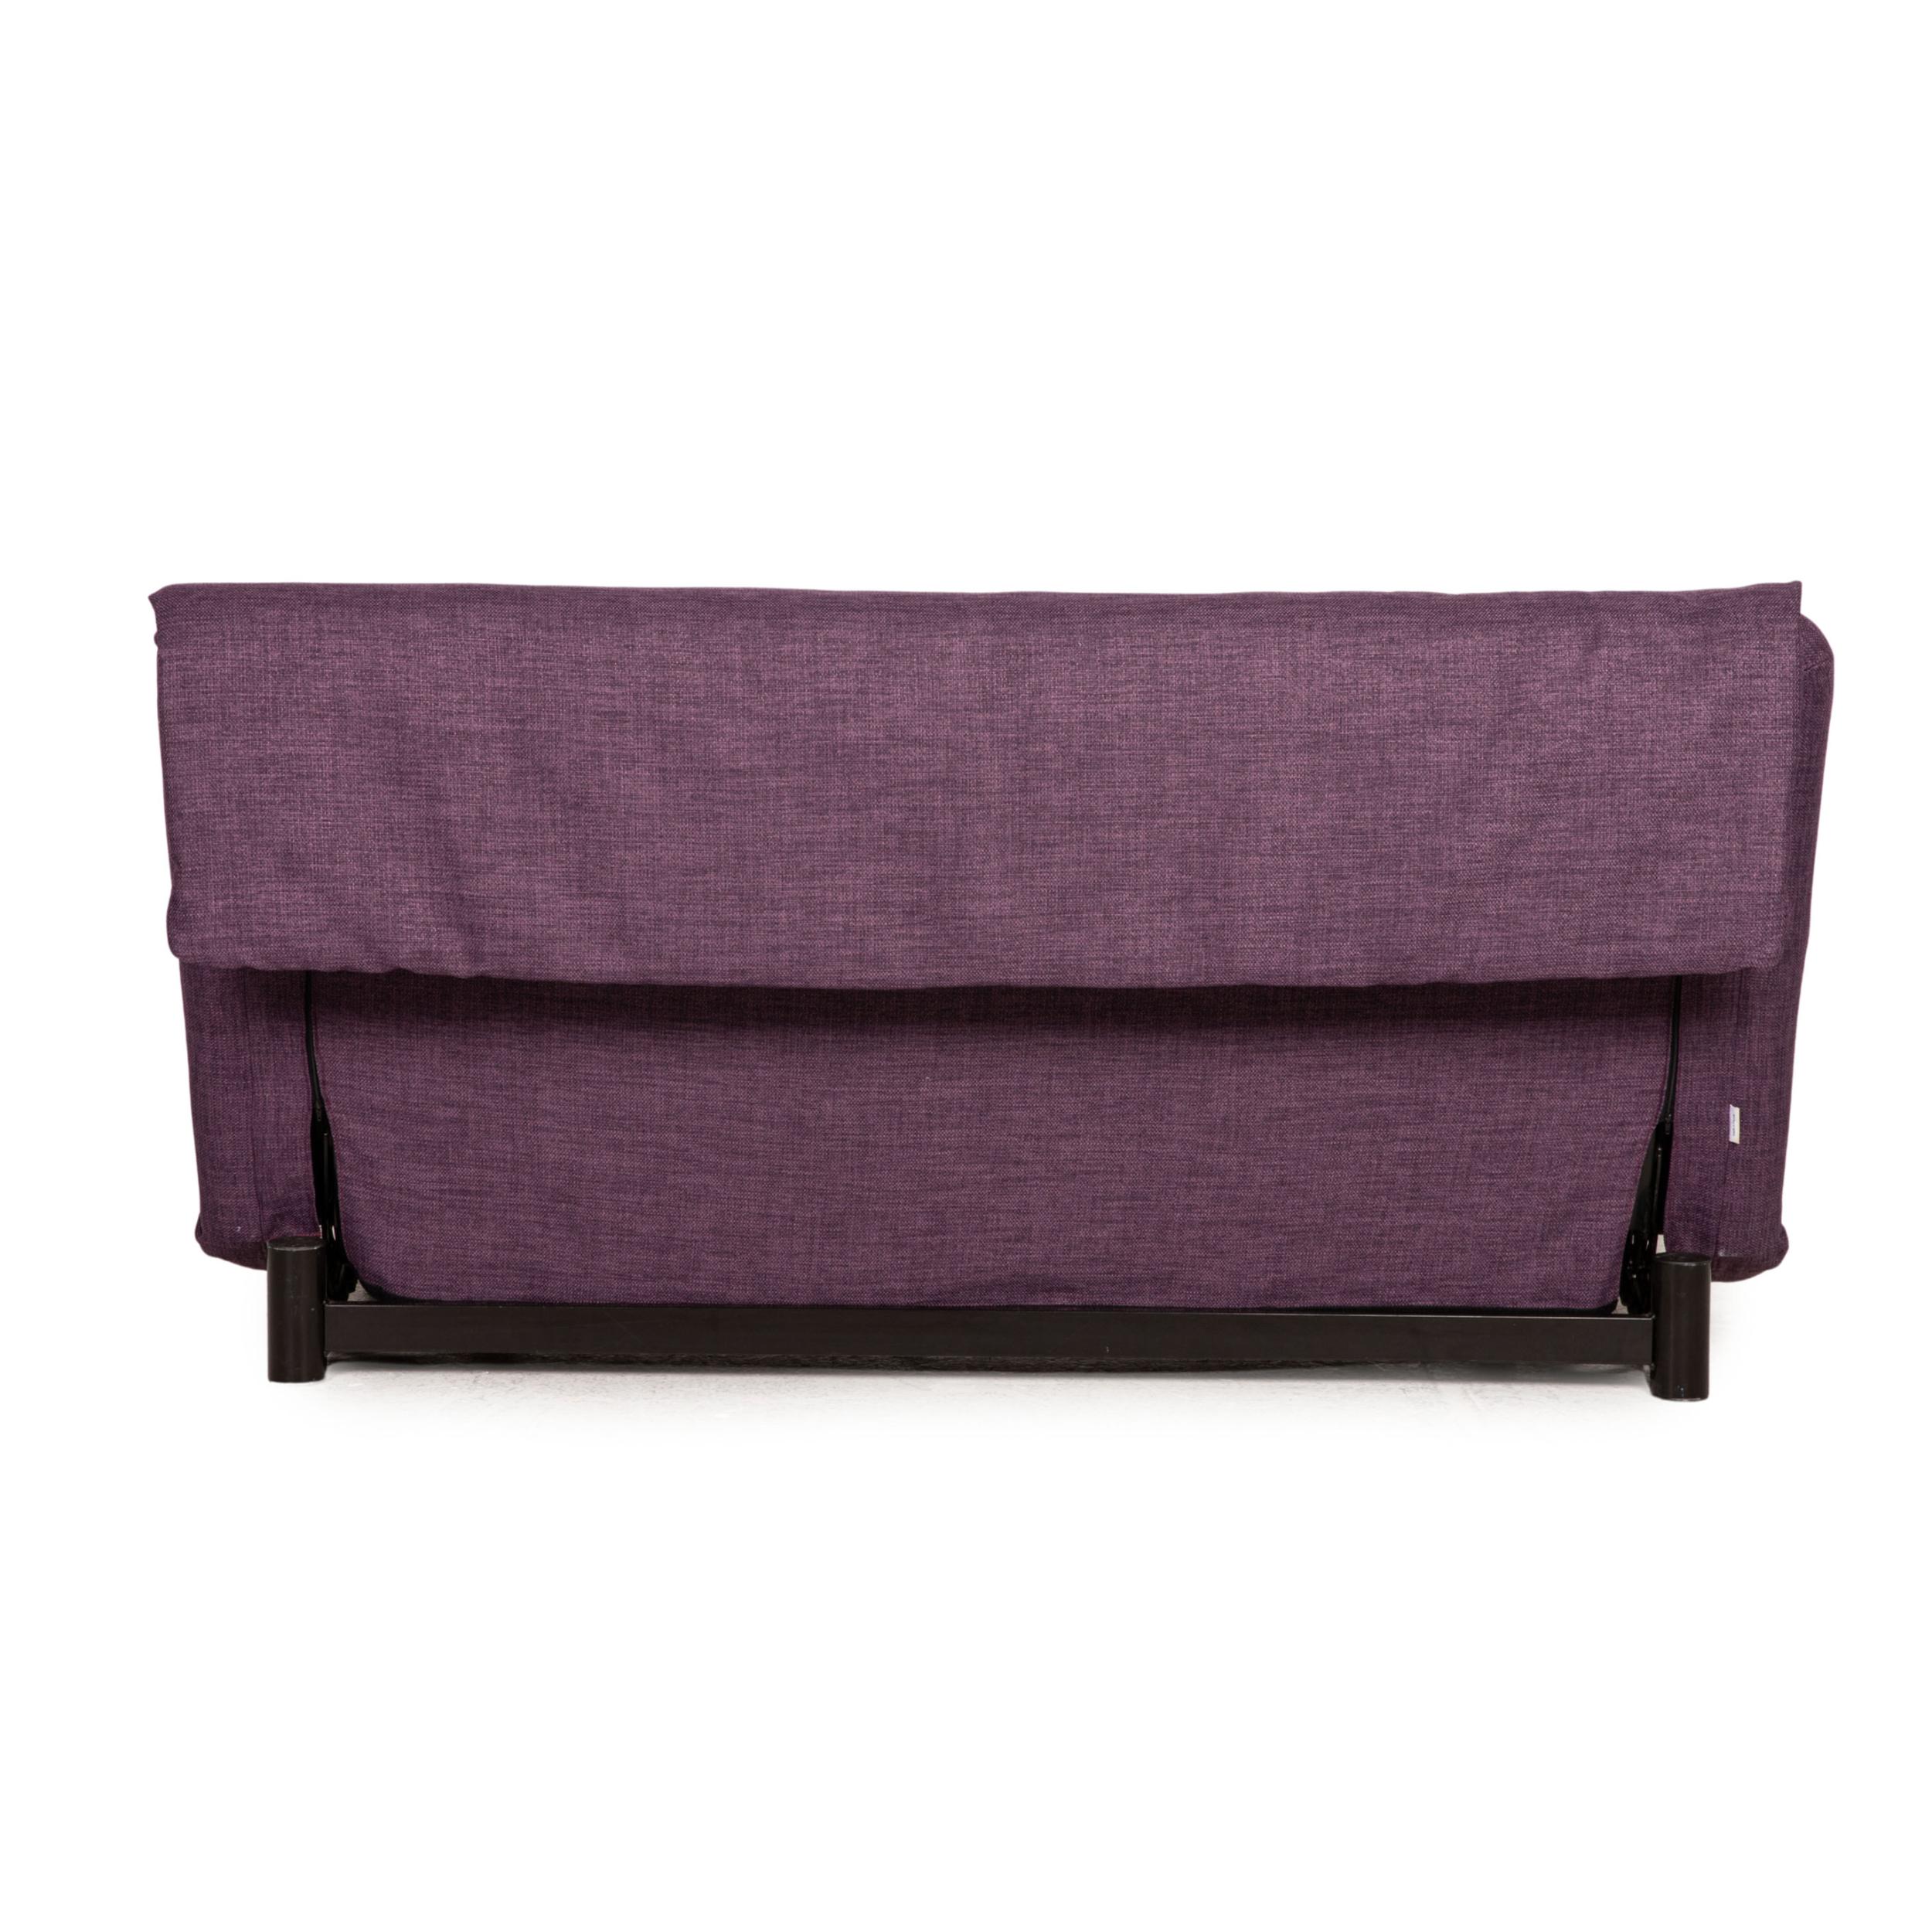 Ligne Roset Multy Fabric Sofa Purple Three-Seater Couch Function Sleeping For Sale 2